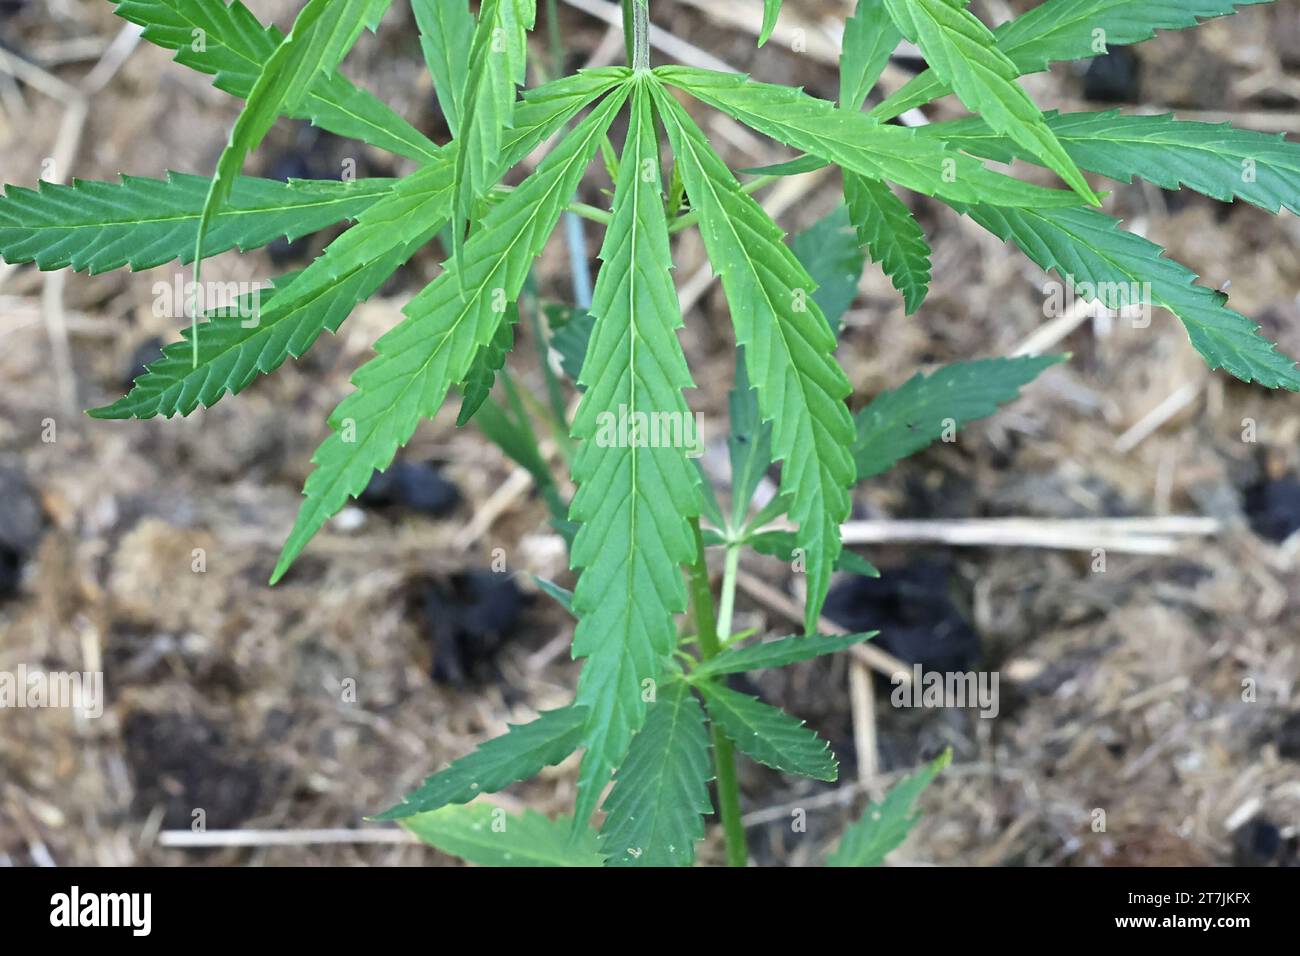 Cannabis sativa, commonly known as marijuana or hemp, wild medicinal plant from Finland Stock Photo